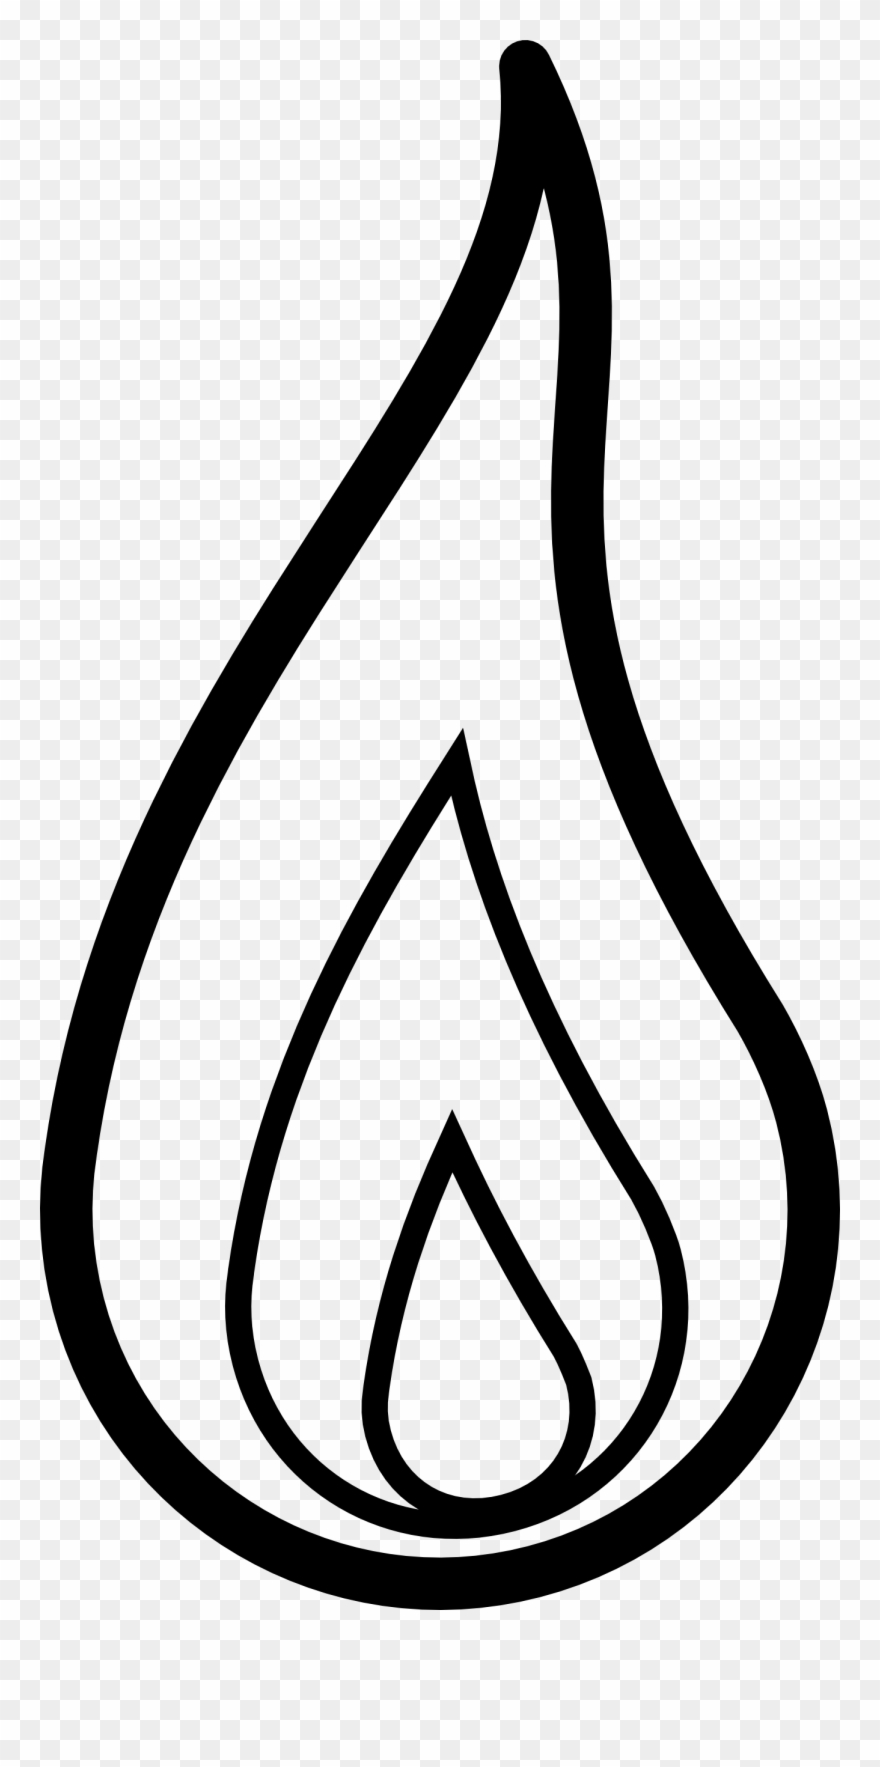 Fire black and white. Clipart flames tongue